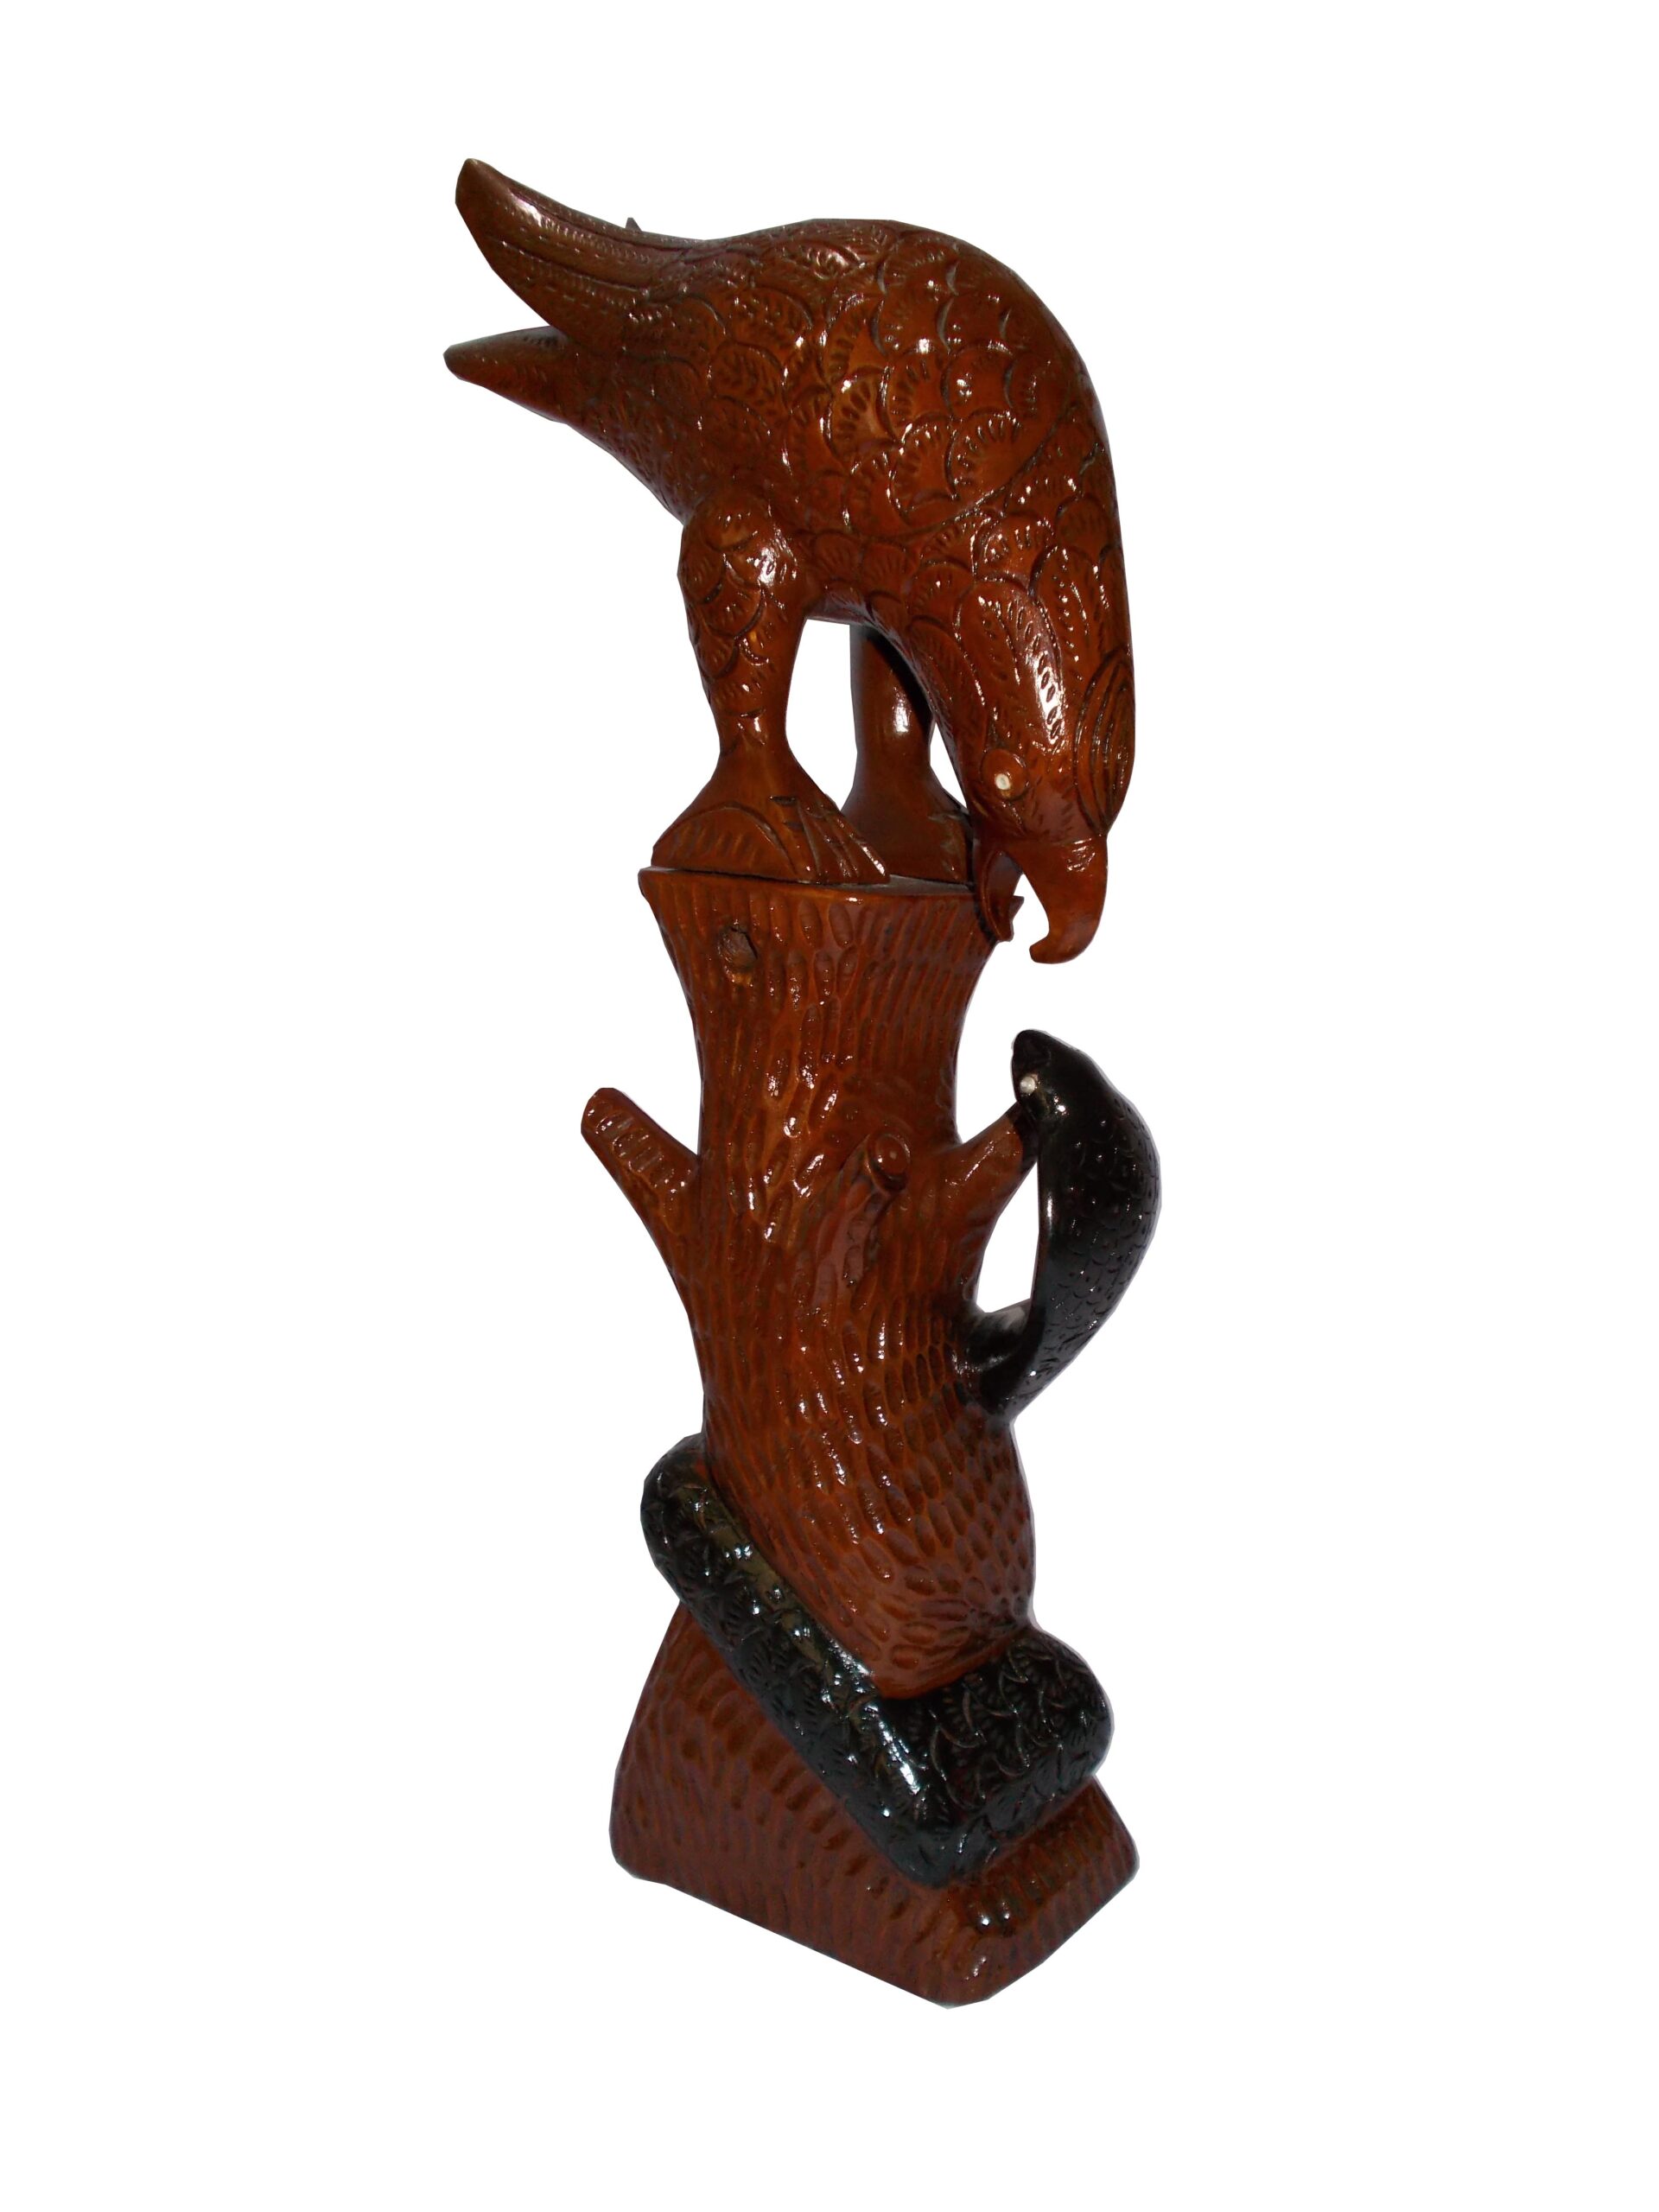 wooden eagle holding a serpent